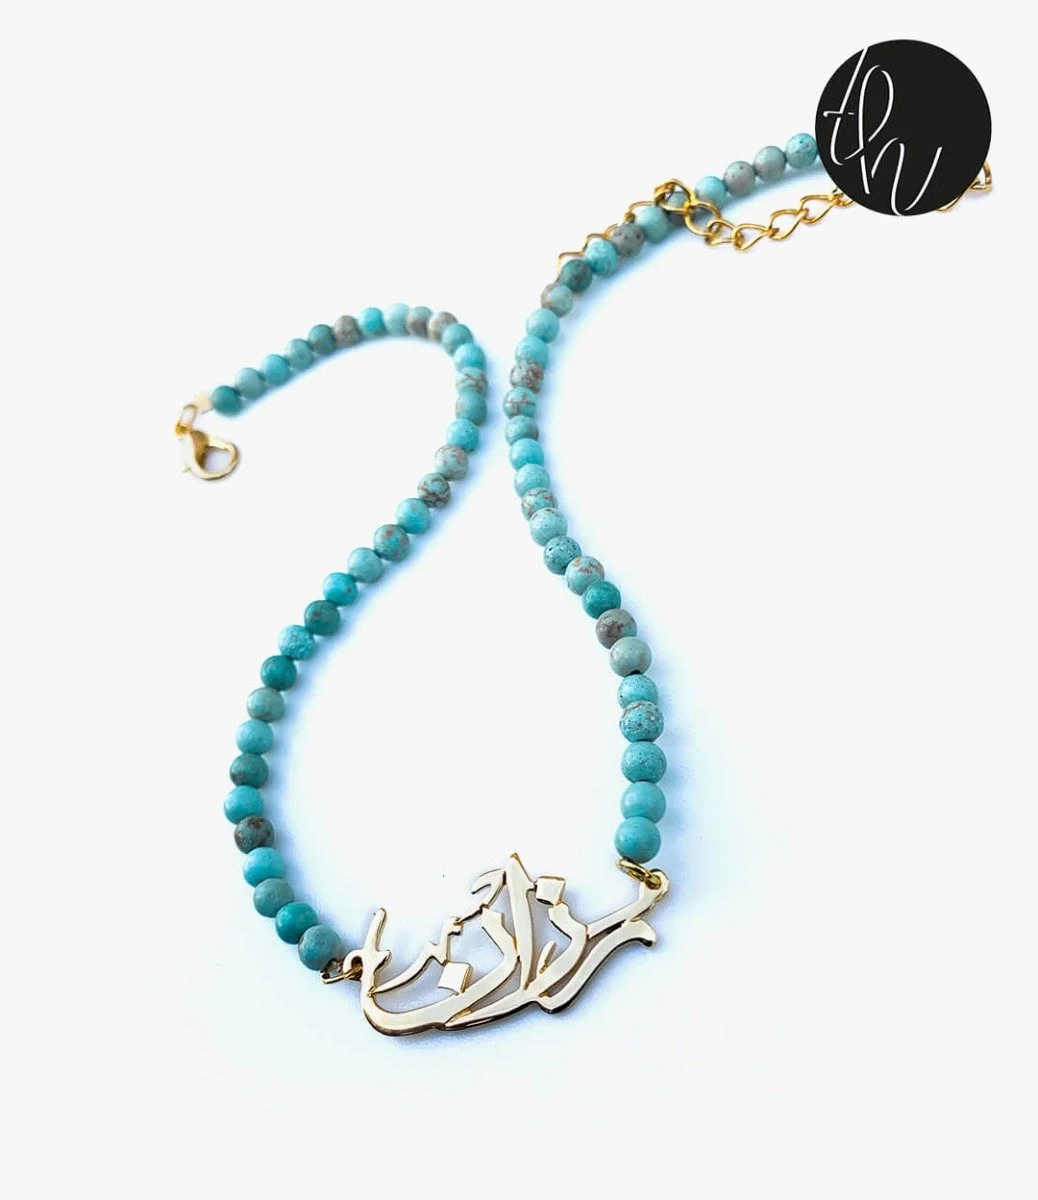 Personolized Name With Blue Beads Necklace